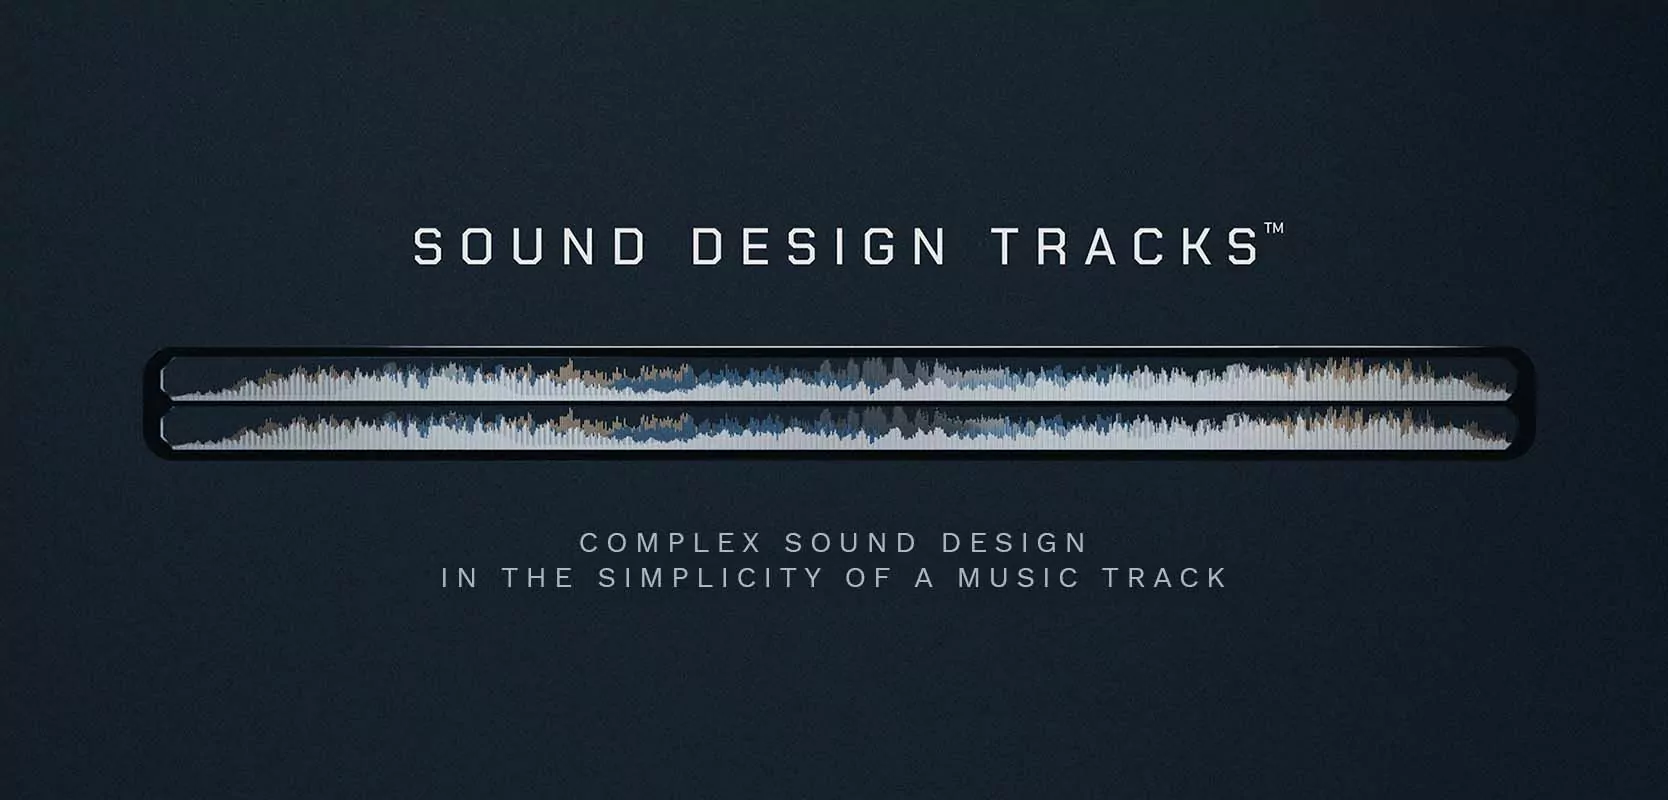 waveform of an audio file for sound design and cinematic music